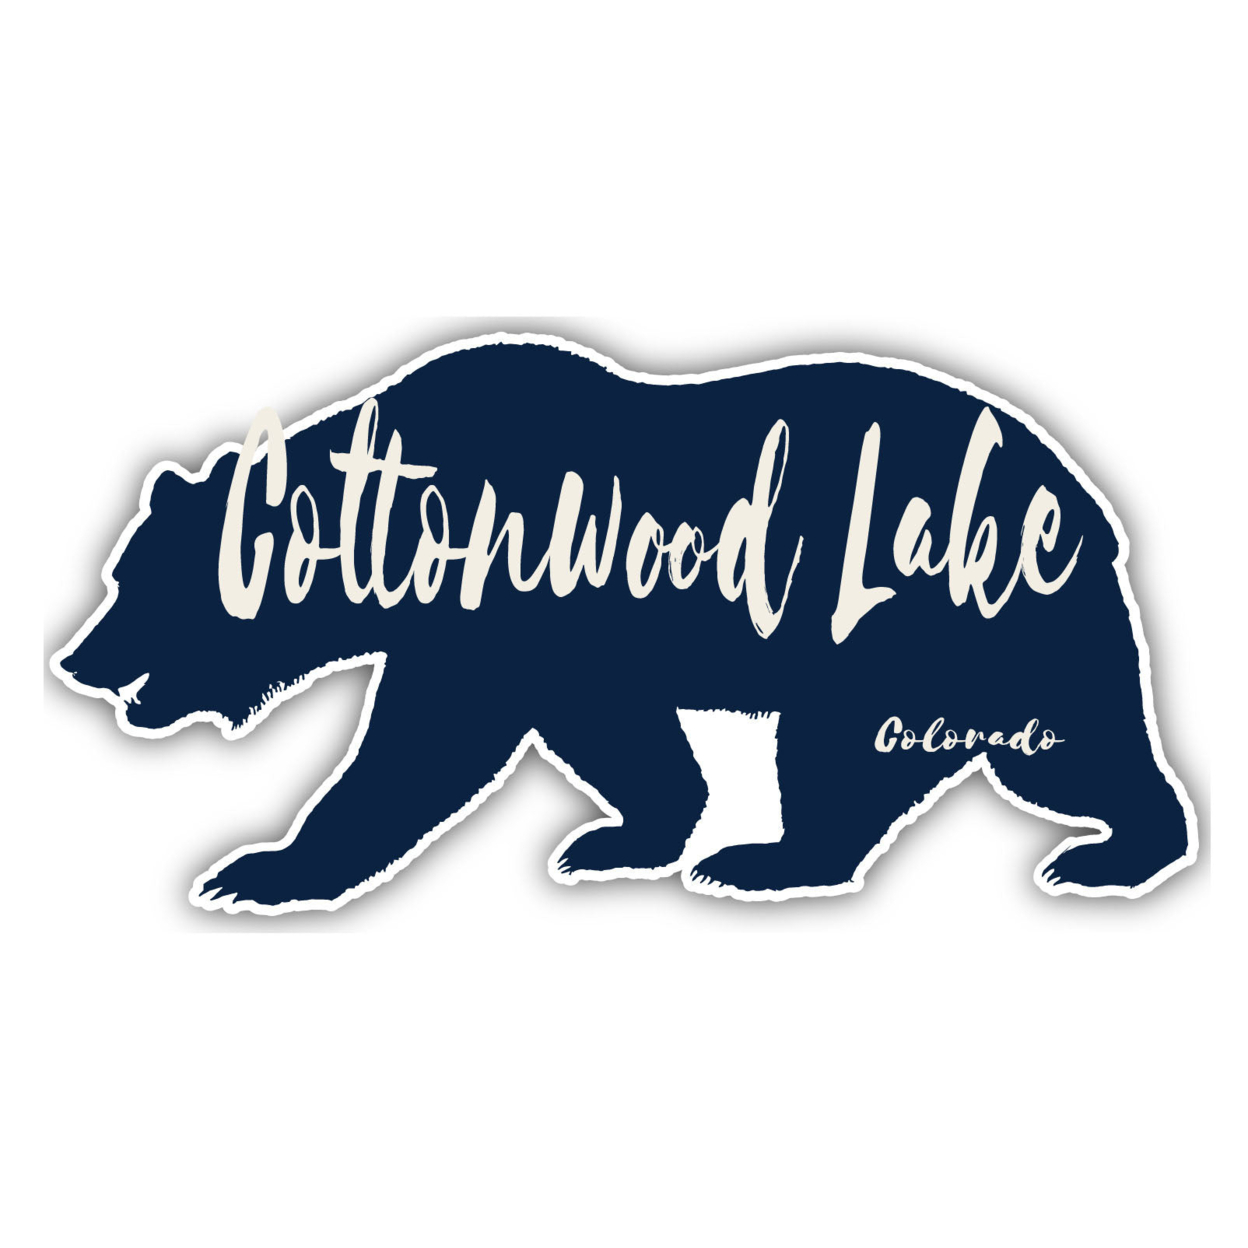 Cottonwood Lake Colorado Souvenir Decorative Stickers (Choose Theme And Size) - 4-Pack, 10-Inch, Camp Life